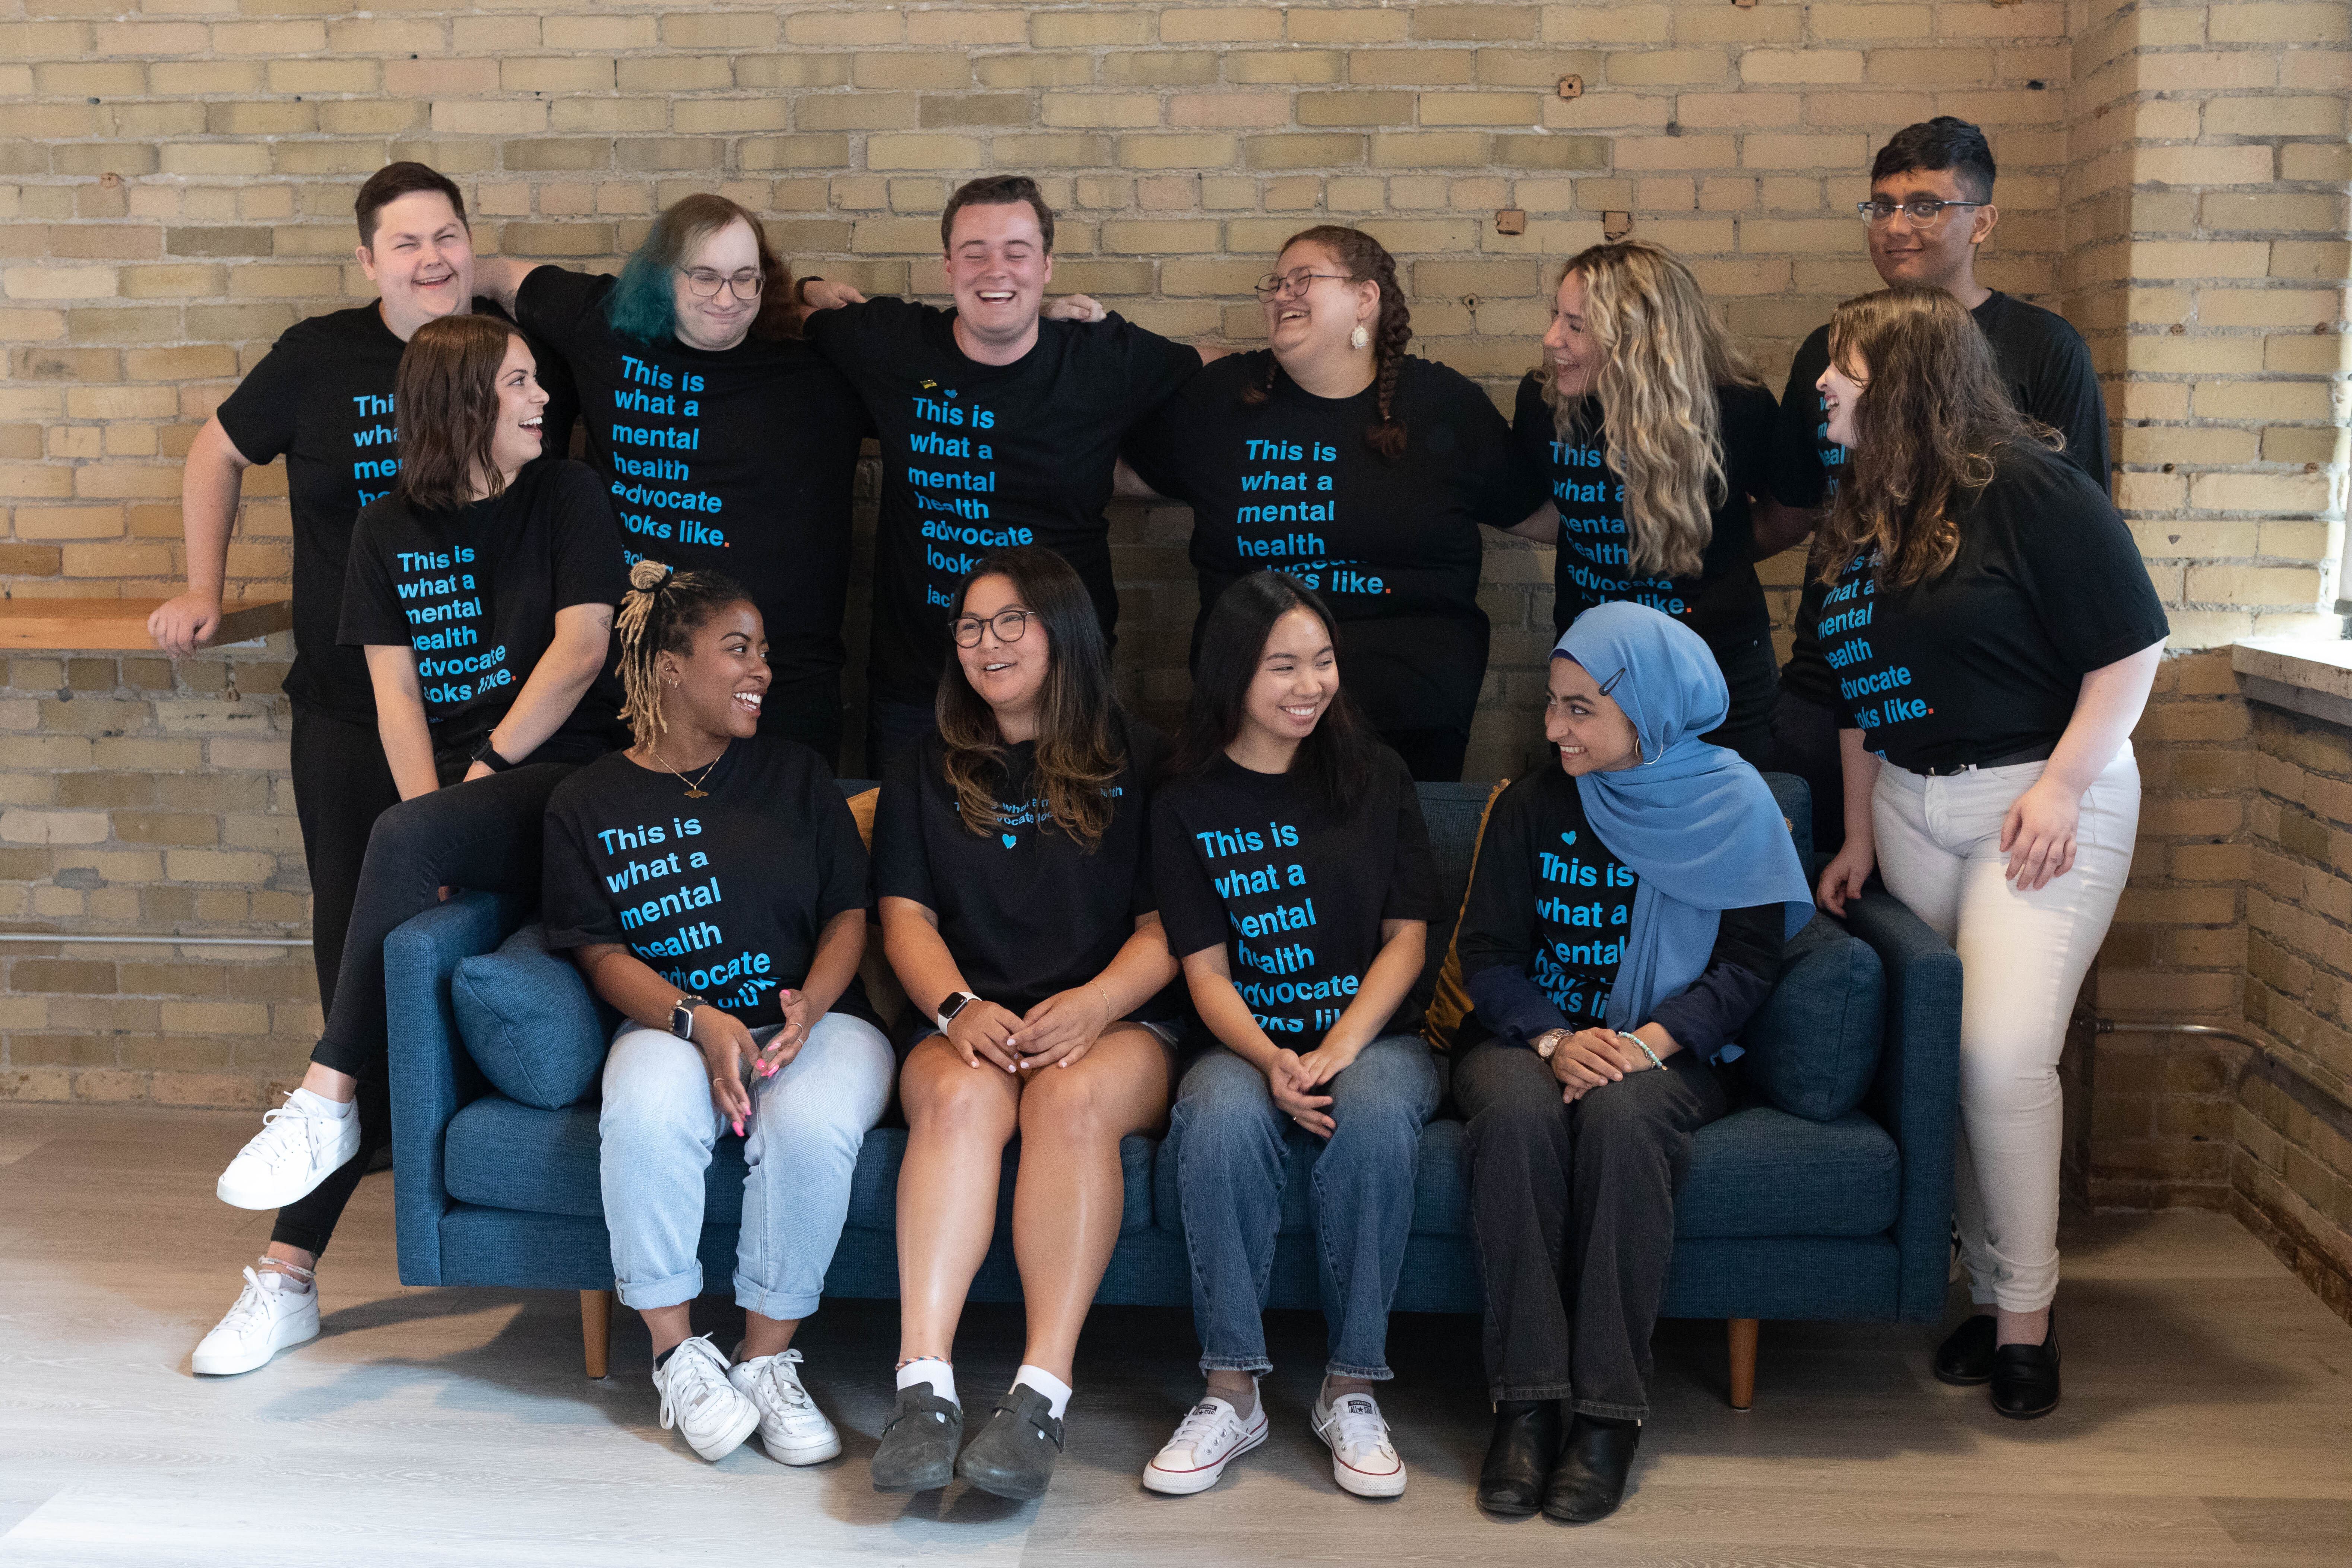 A group of young people sit on or stand around a blue couch against a plain brick wall. The group is diverse and displays a wide range of skin colour, gender expression, and cultural background. All of the youth wear the same Jack.org black T-shirt with blue text that reads: “This is what a mental health advocate looks like.” The youth are smiling with their arms around each other and laughing.